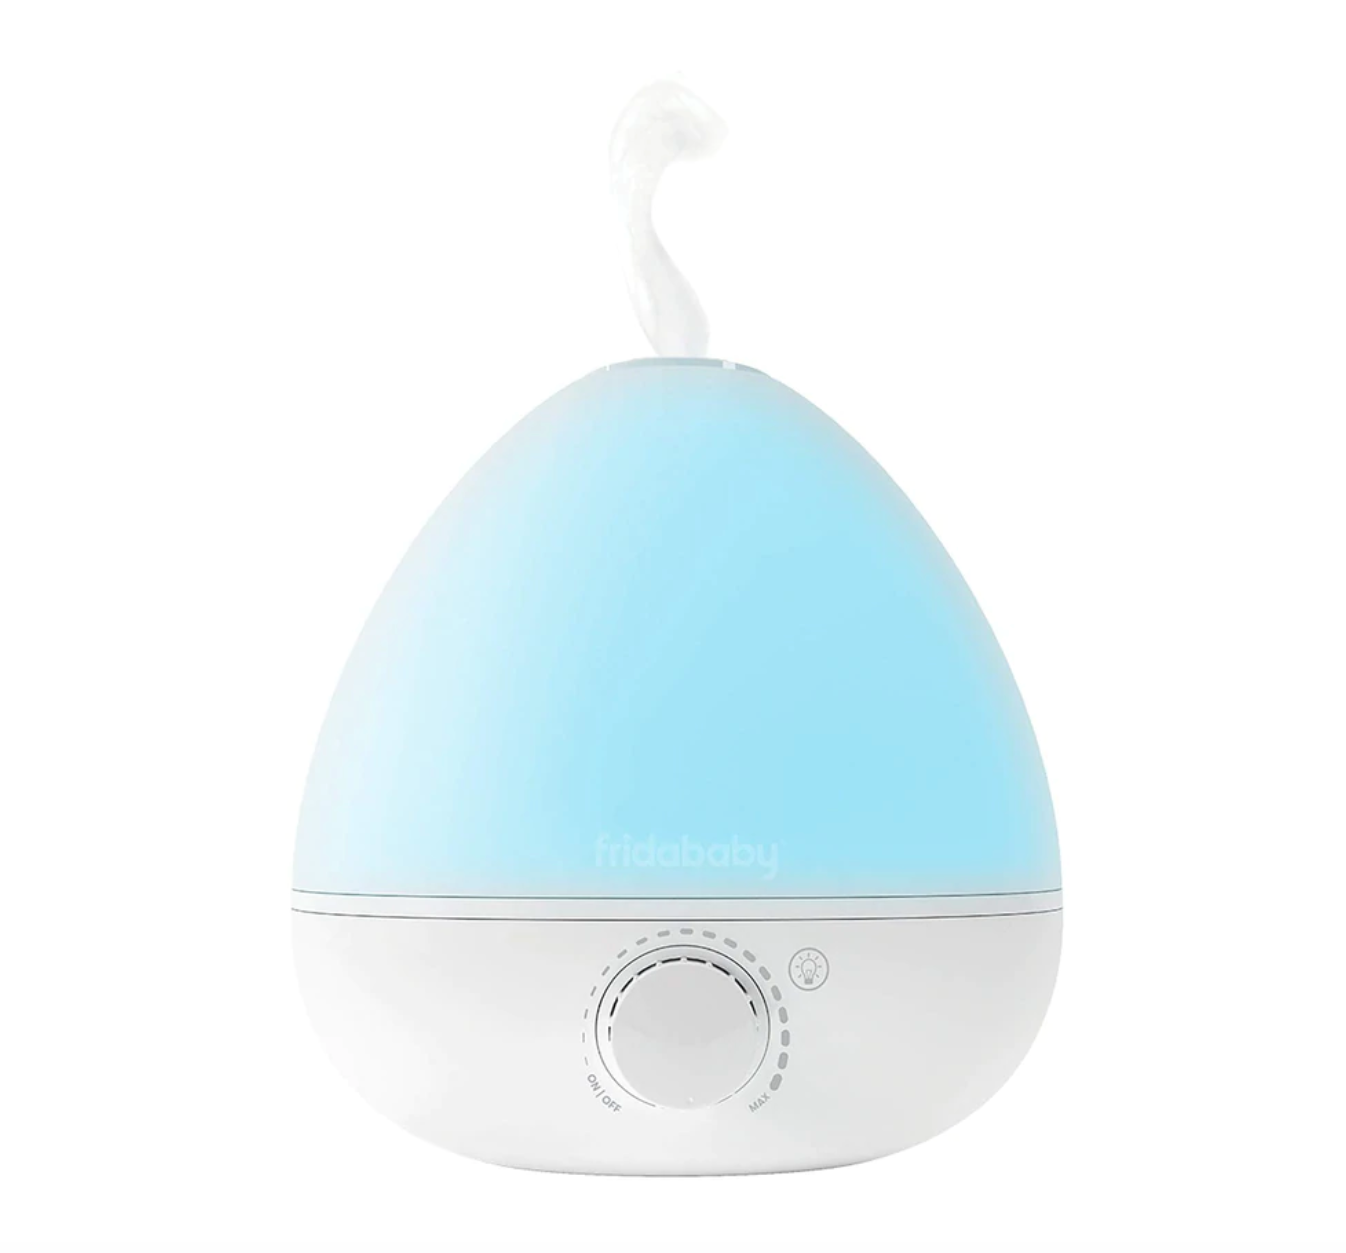 Frida Baby Fridababy 3-in-1 Humidifier with Diffuser and Nightlight